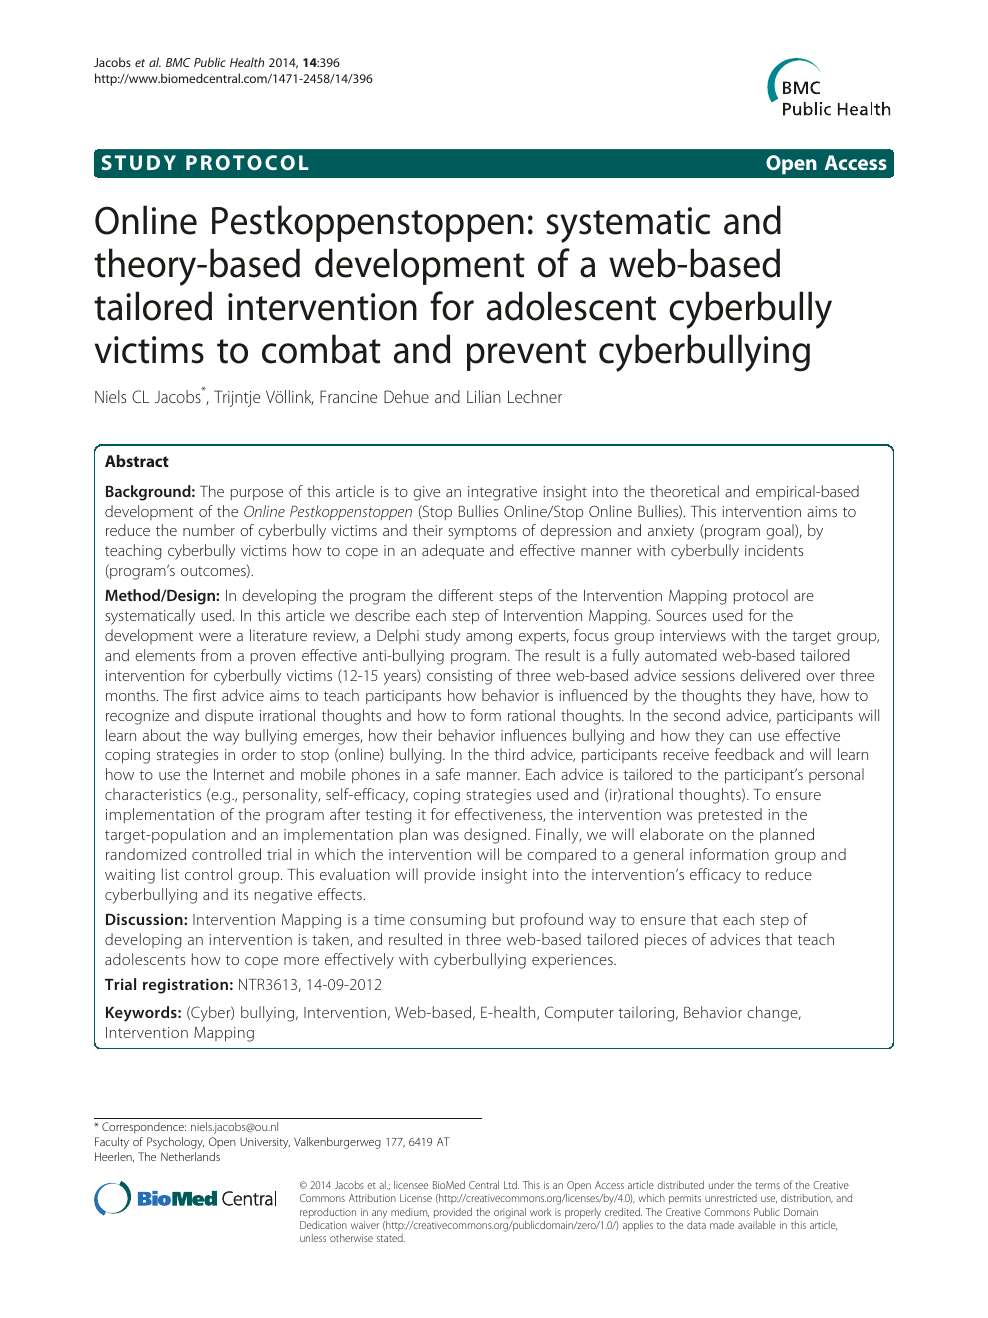 cyberbullying research paper chapter 1